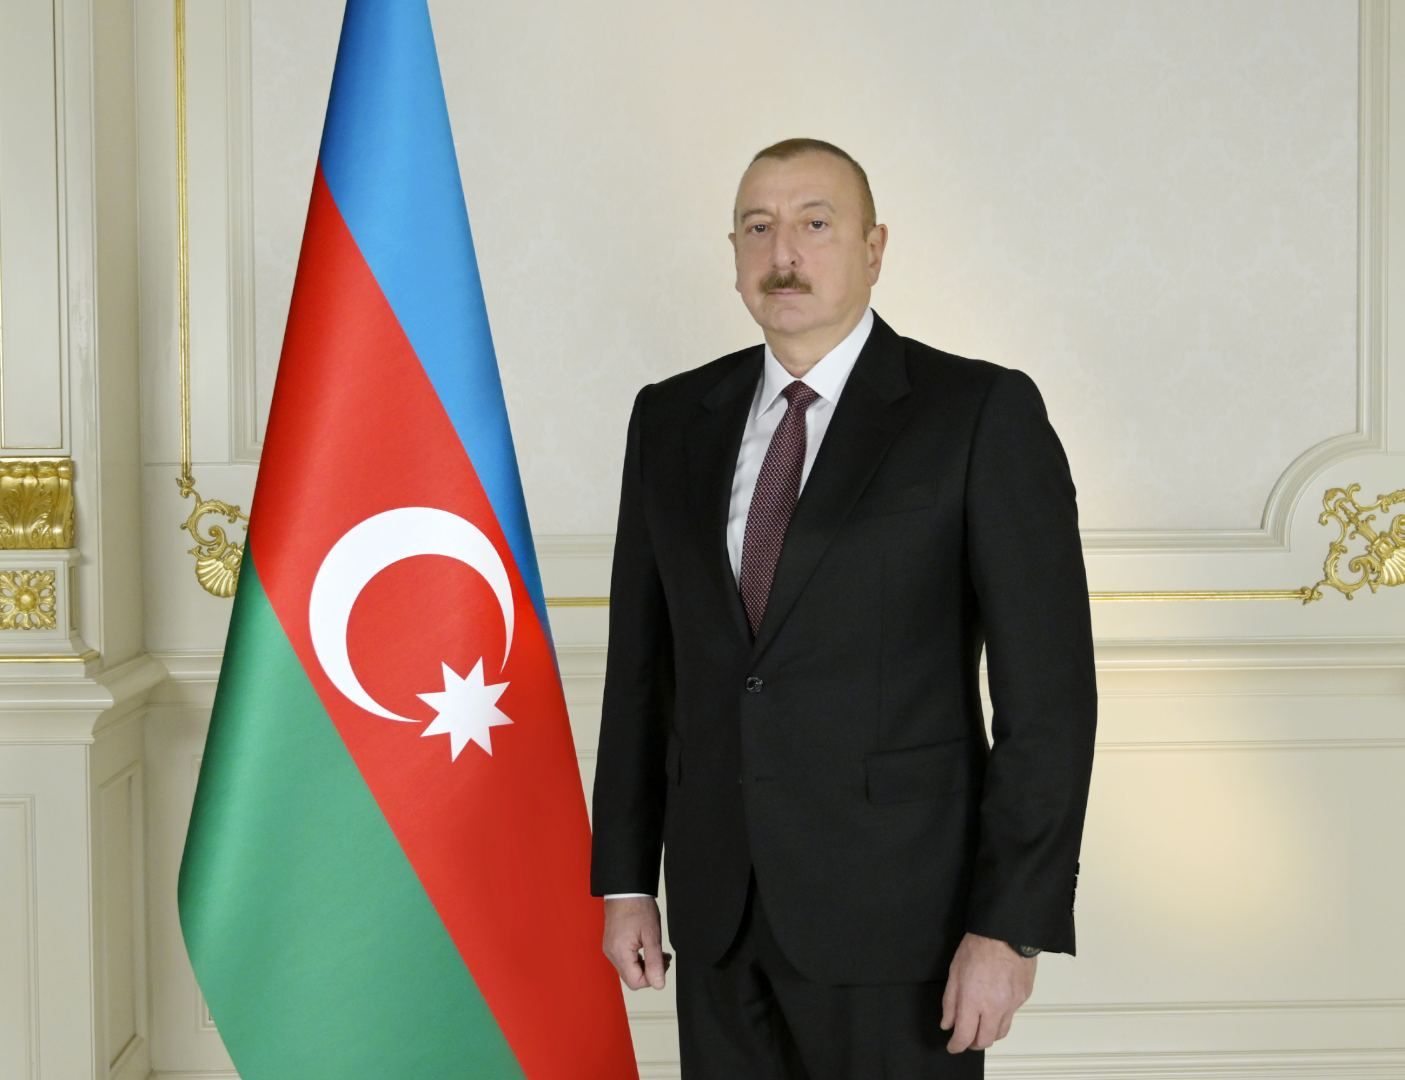 Albanian Prime Minister congratulates President Ilham Aliyev on his victory in election